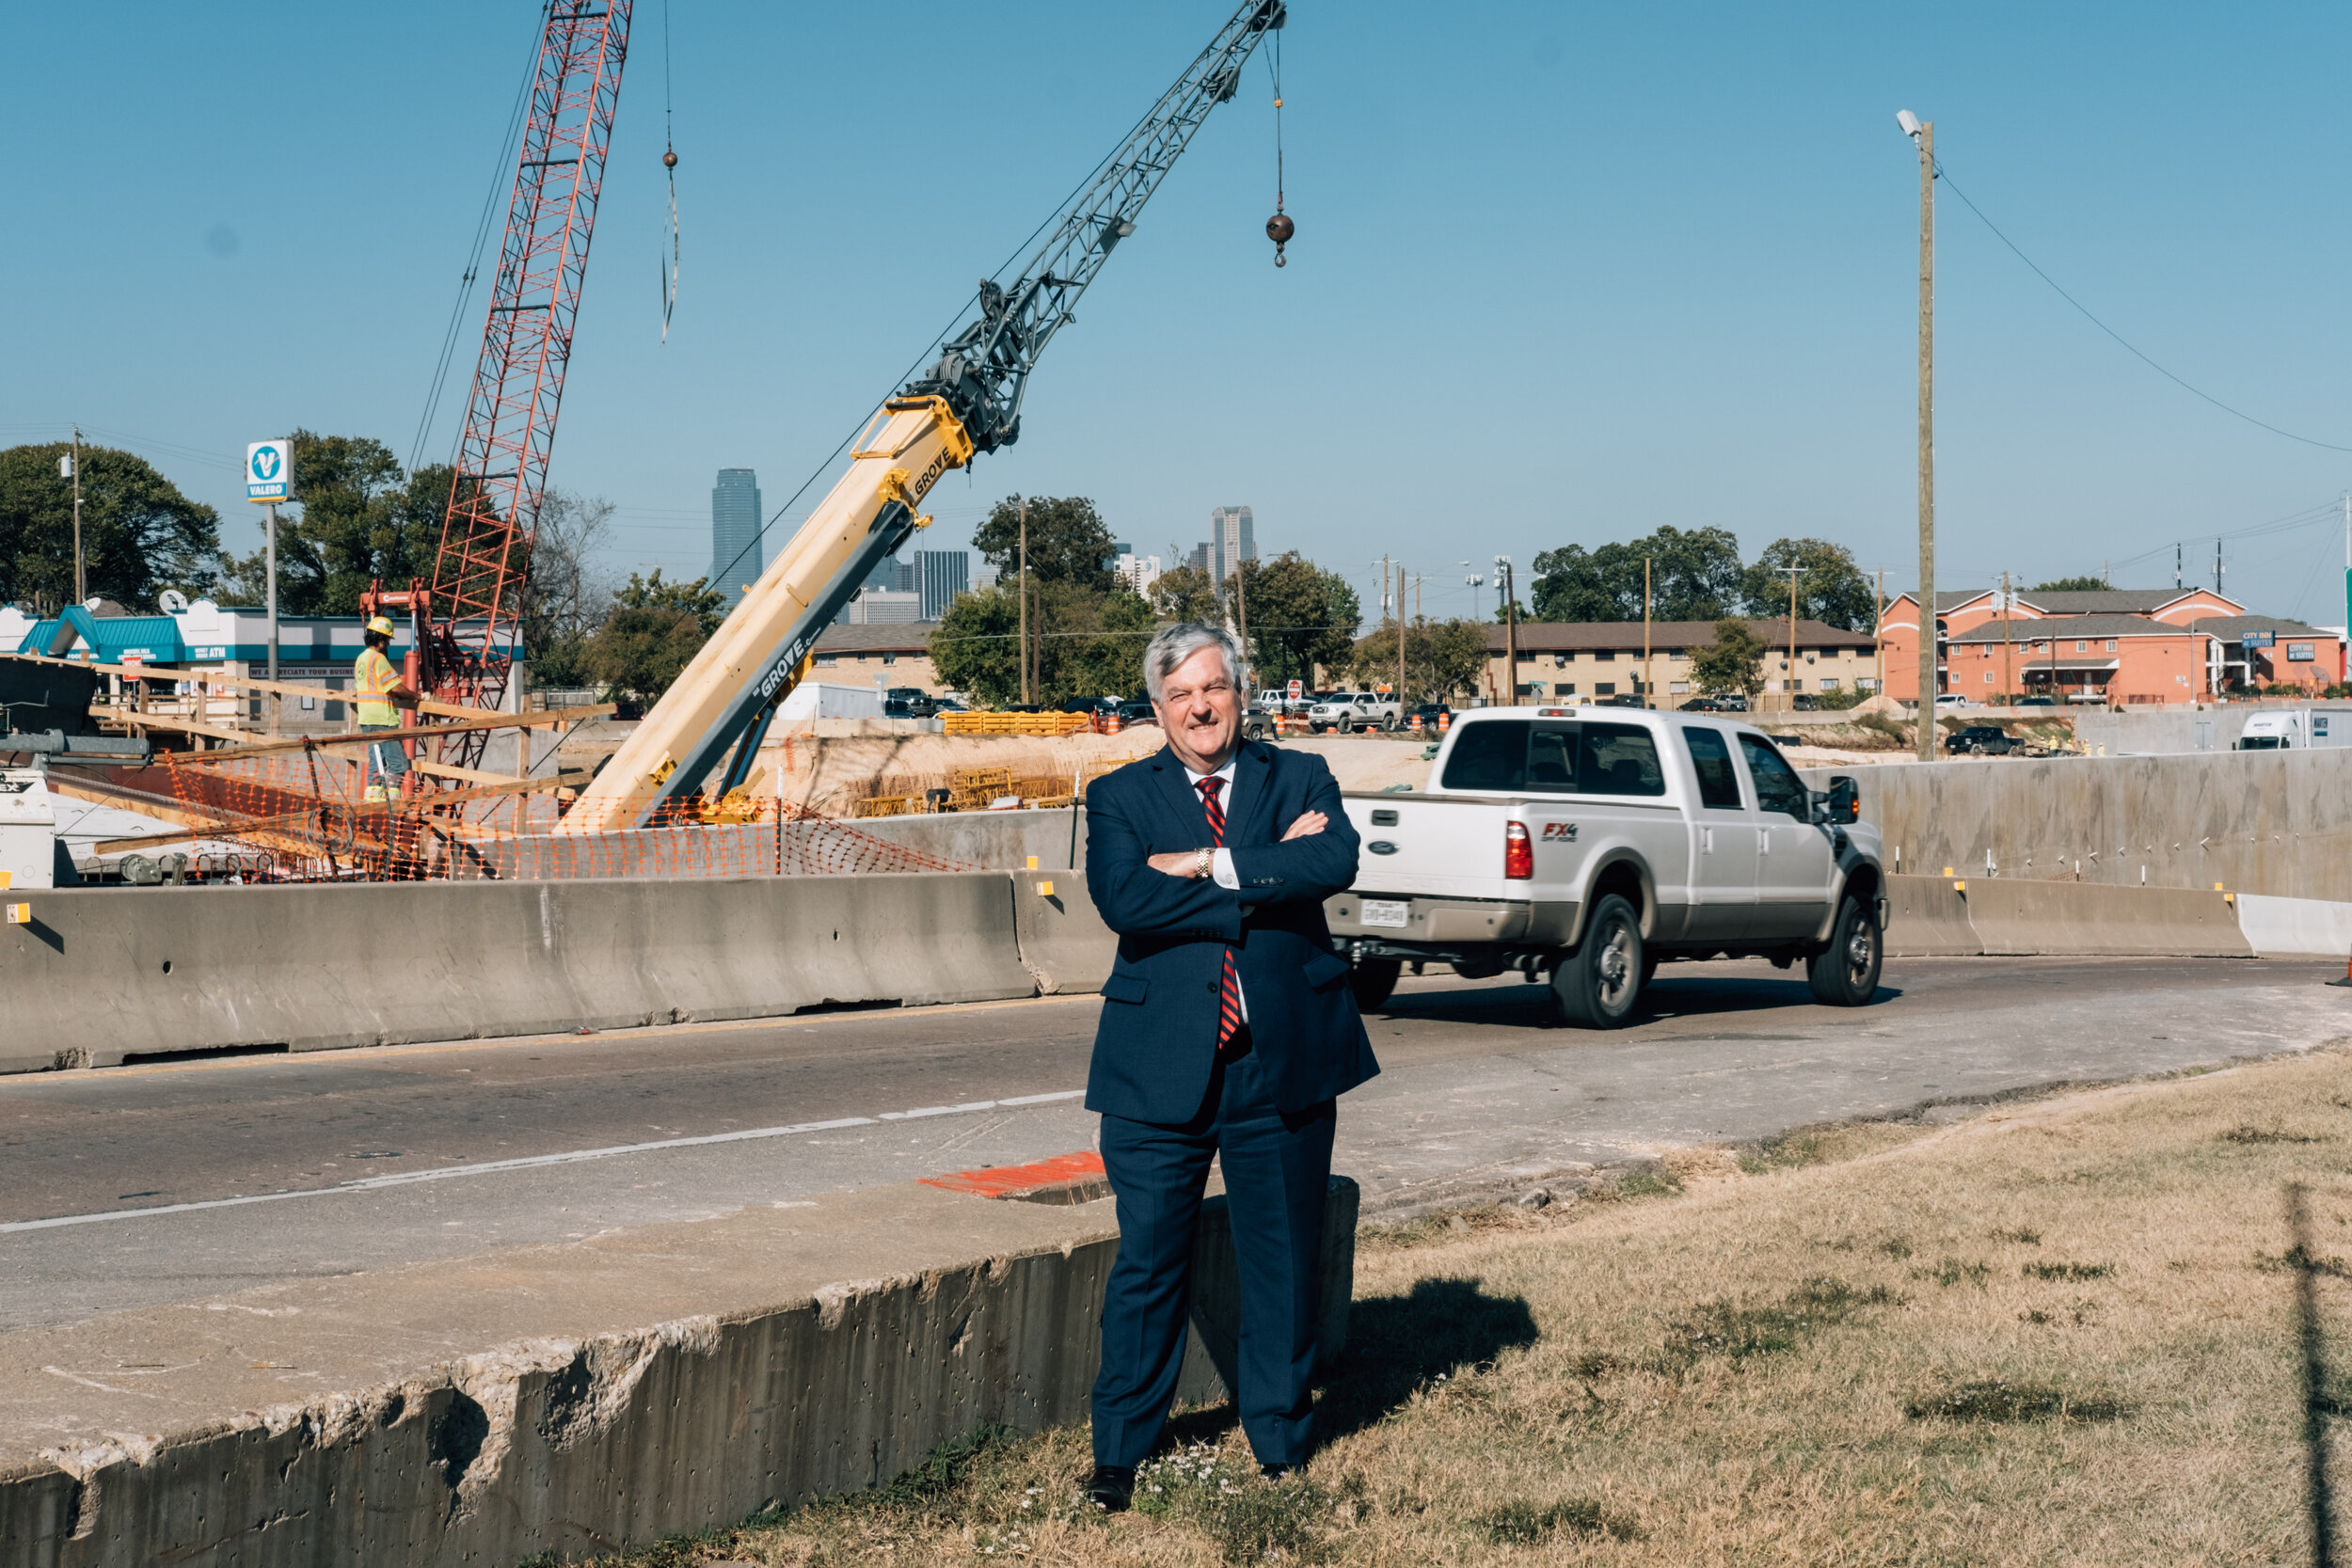 Mike Gruber, at the Southern Gateway Park construction site.